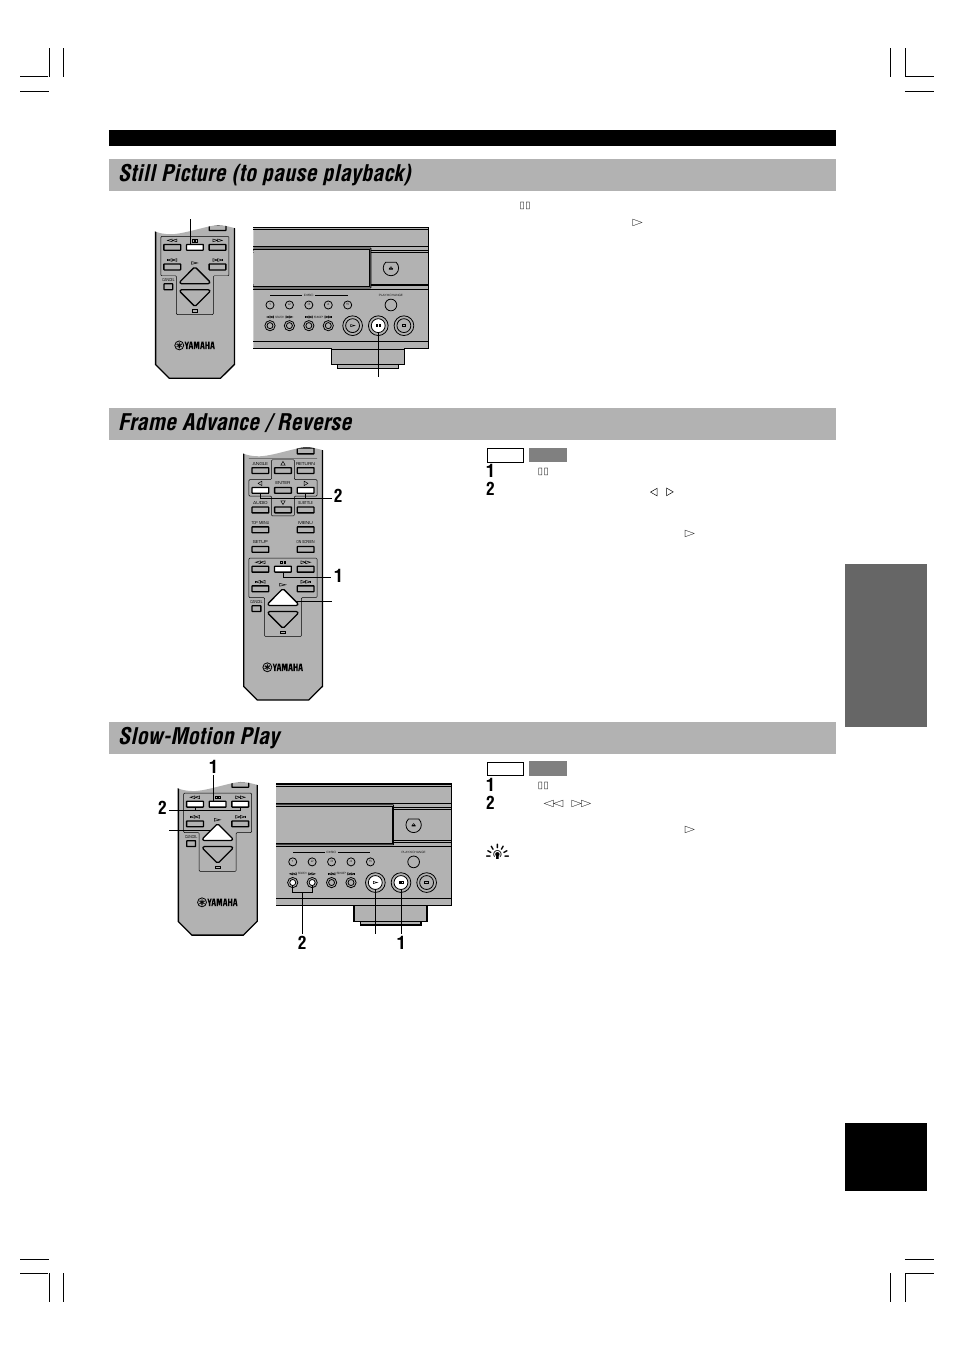 Still picture (to pause playback), Frame advance / reverse, Slow-motion play | Press d (pause). • to resume play, press w (play), Dvd vcd, Press d (pause) during playback | Yamaha DV-C6280 User Manual | Page 19 / 39